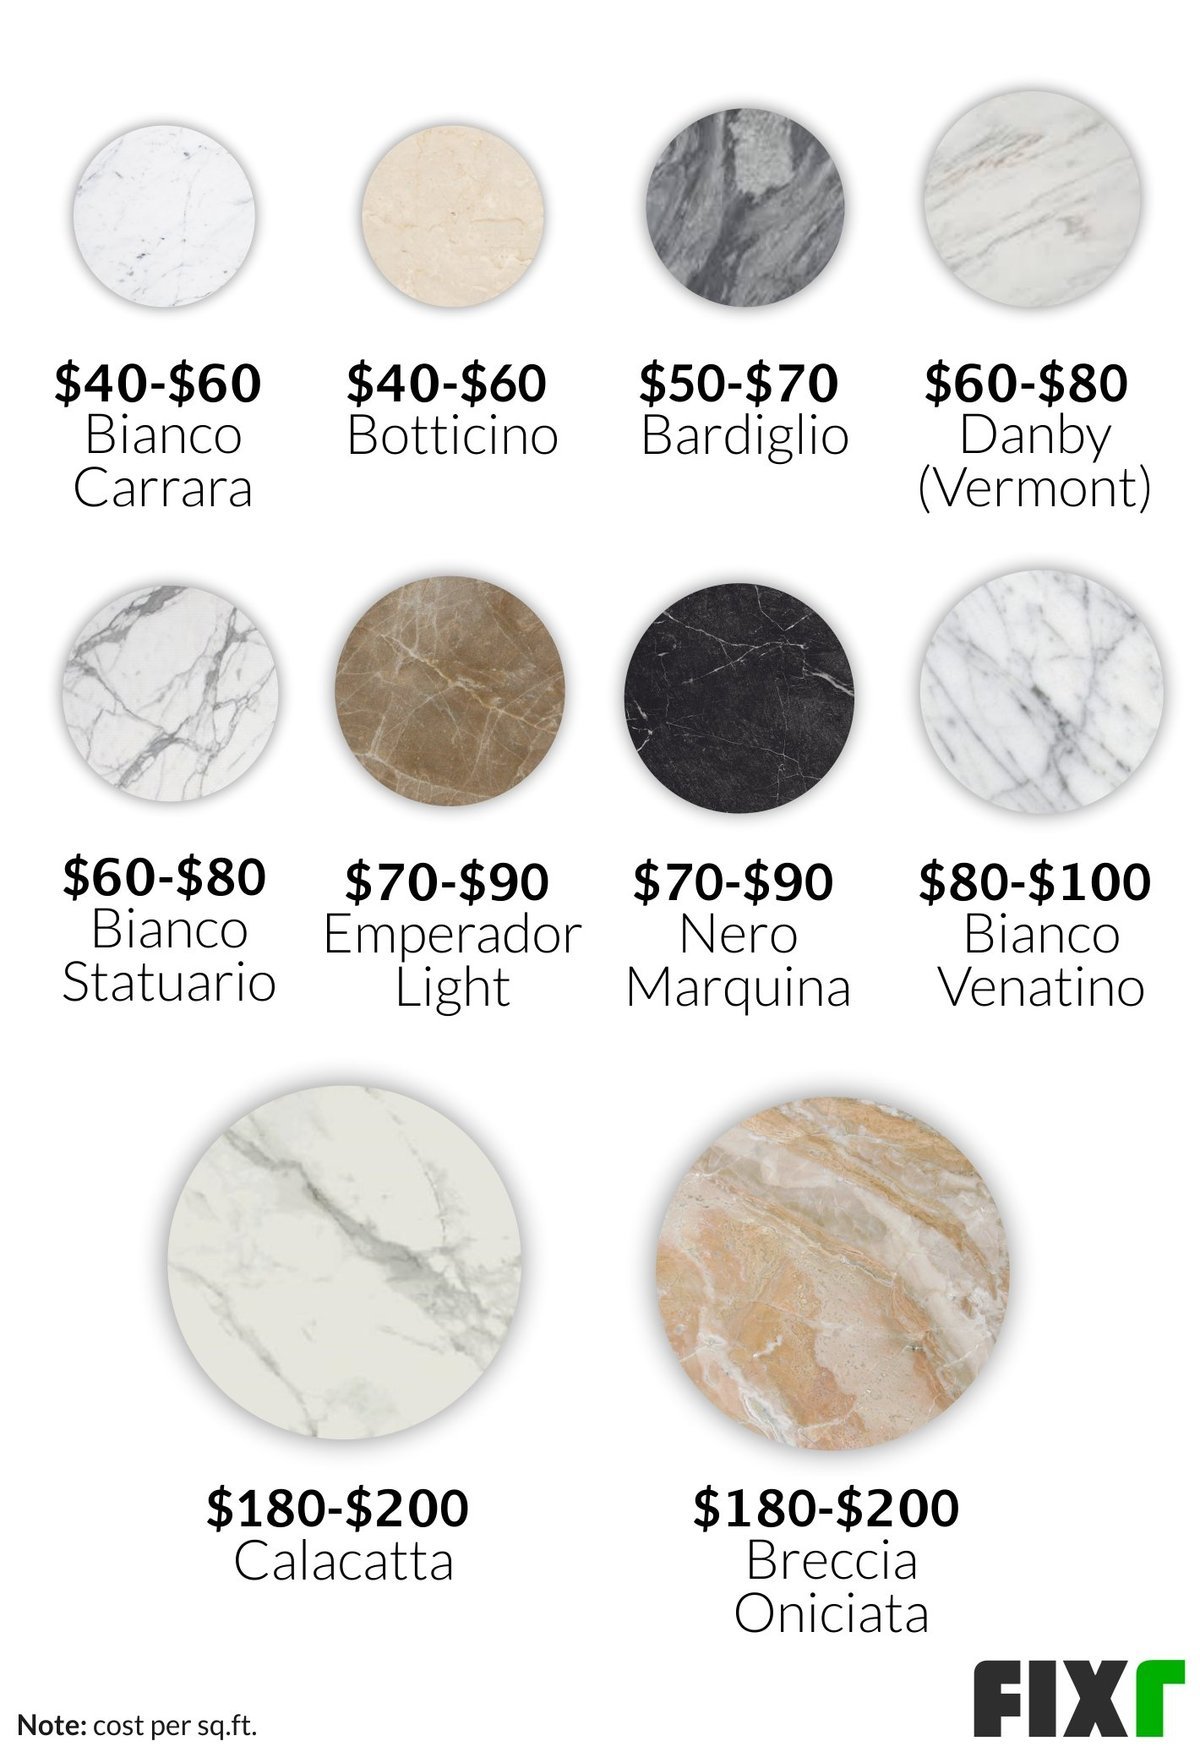 2022 Marble Countertops Cost To, Carrara Leathered Marble Countertops